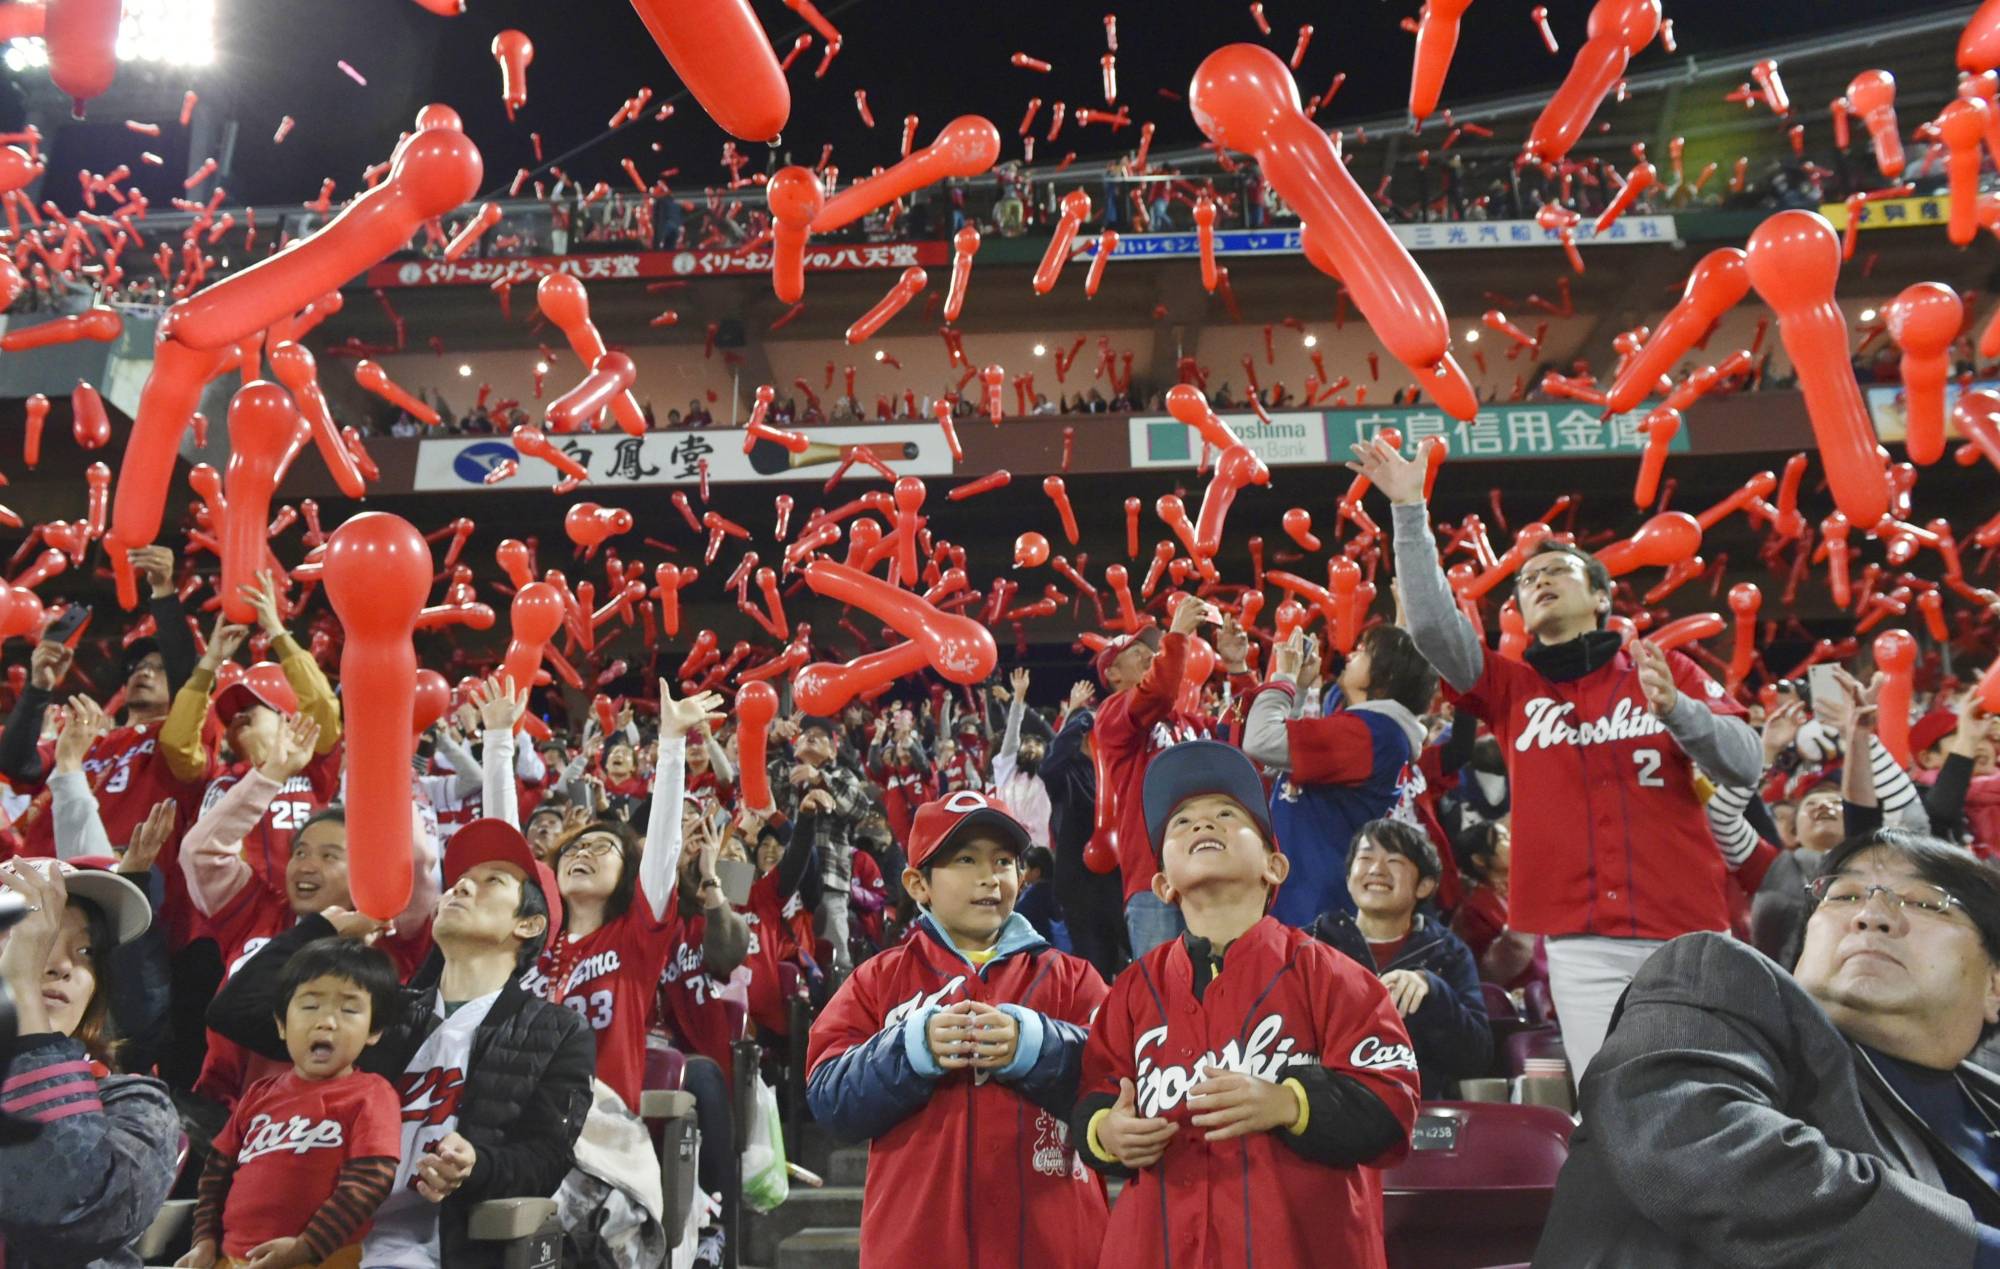 Carp fans release balloons during the seventh inning in Game 2 of the Japan Series at Mazda Stadium in Hiroshima on Oct. 28, 2018. | KYODO